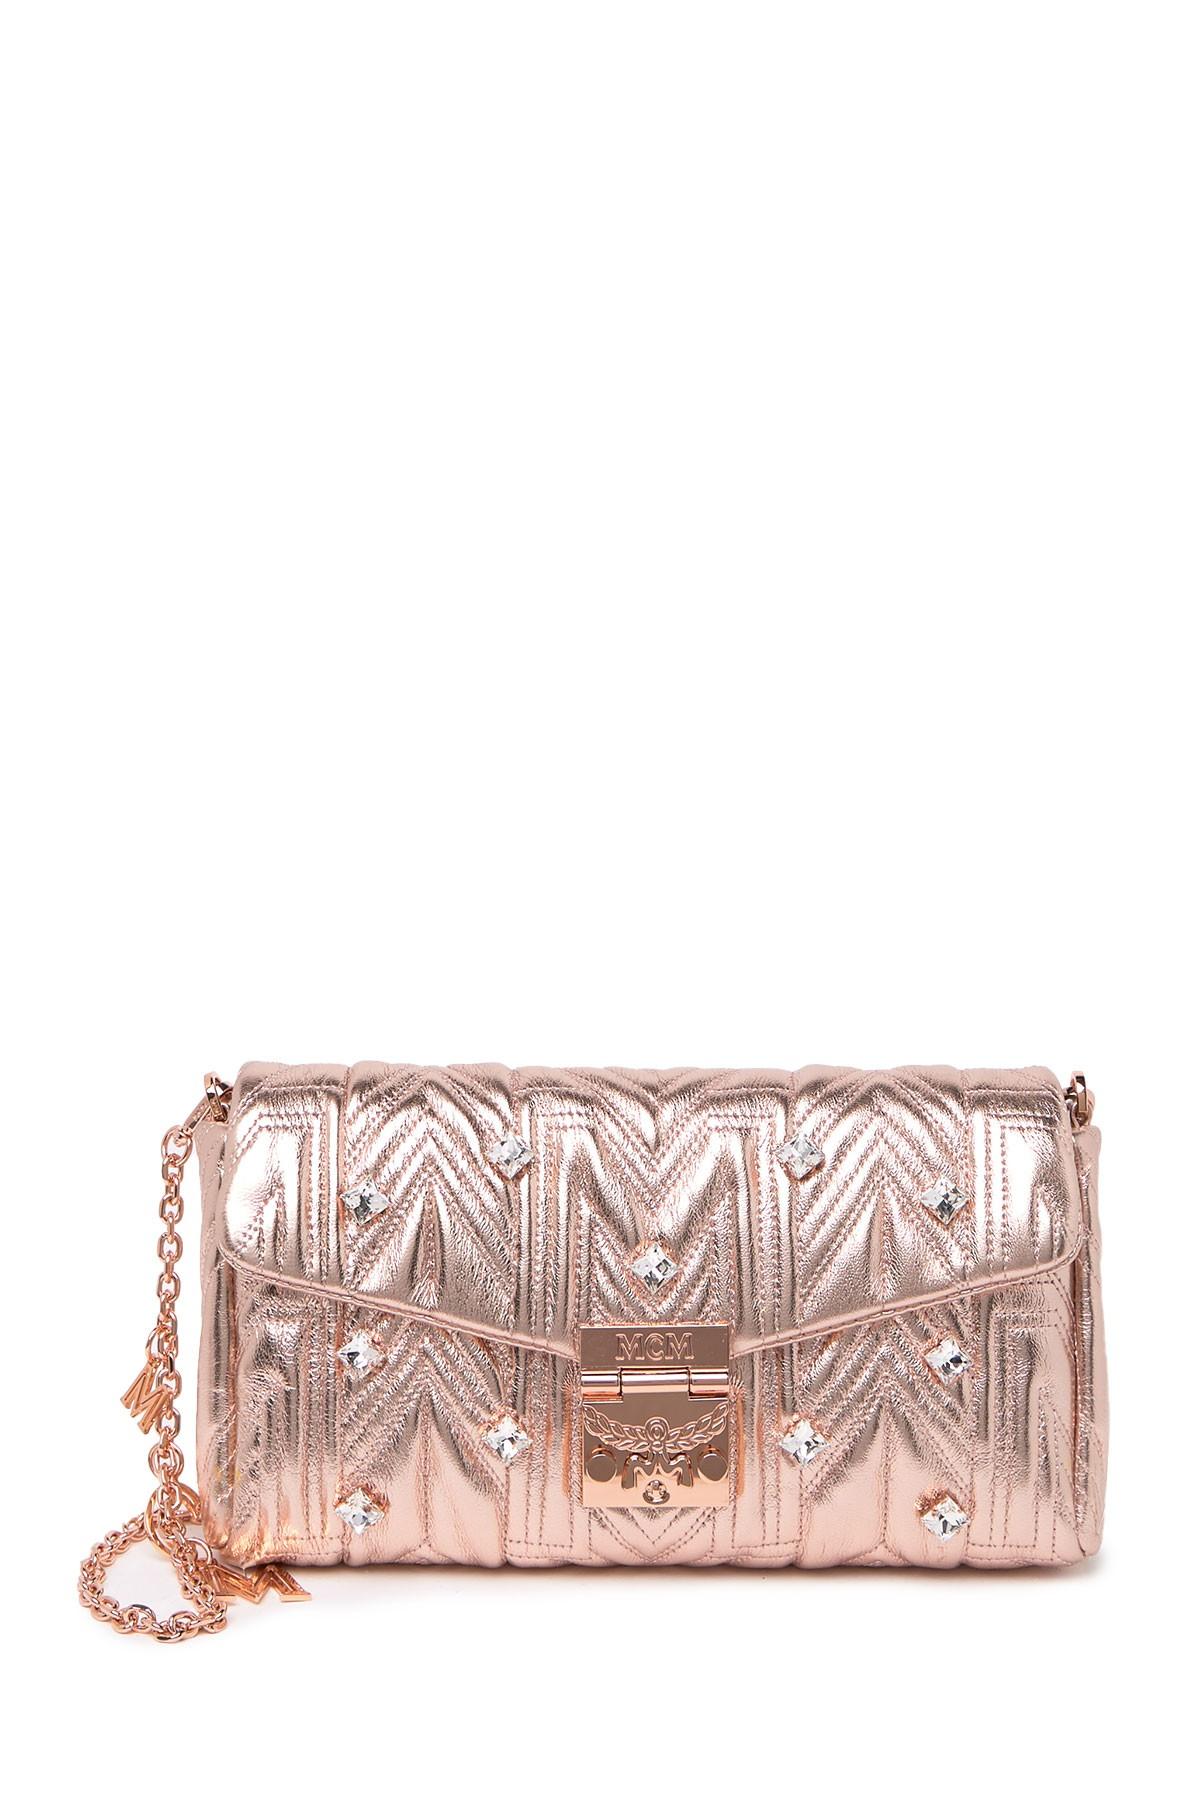 MCM Leather Millie Quilted Chain Strap Shoulder Bag in Pink - Lyst